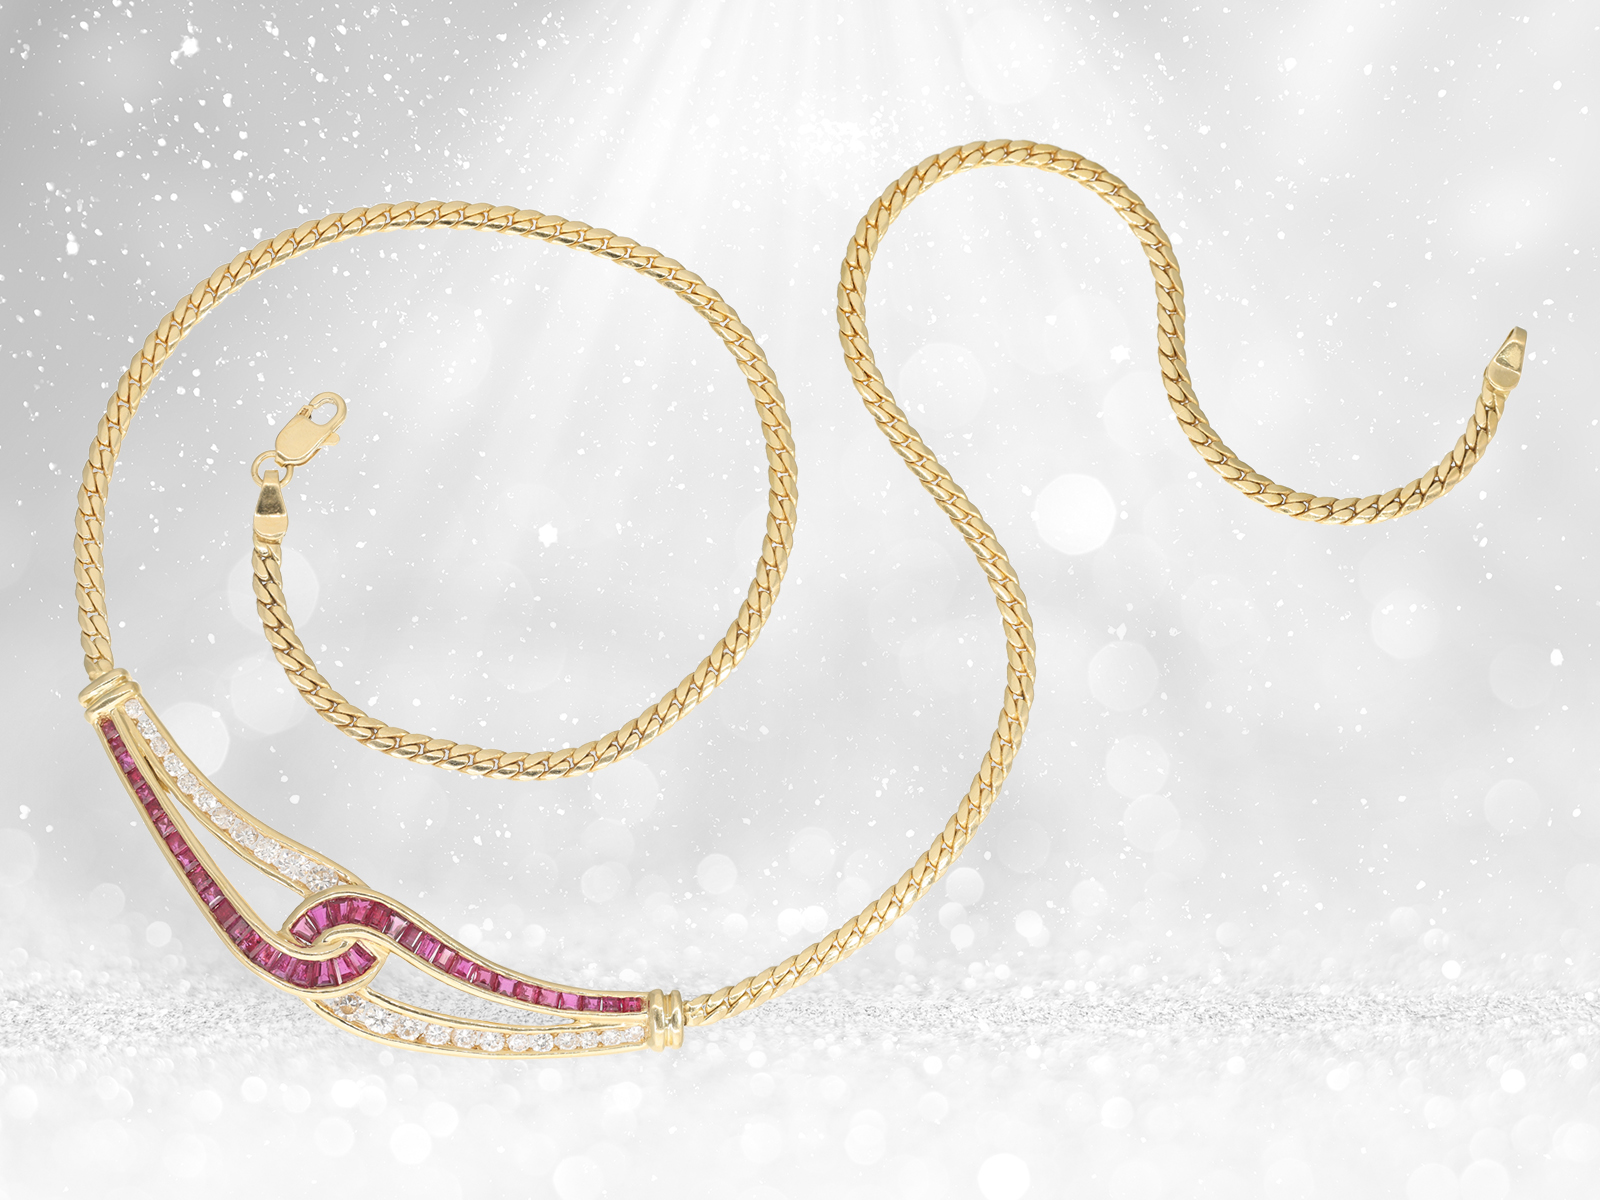 Necklace: high-quality vintage brand jewellery by Bucherer, finest rubies and brilliant-cut diamonds - Image 3 of 3